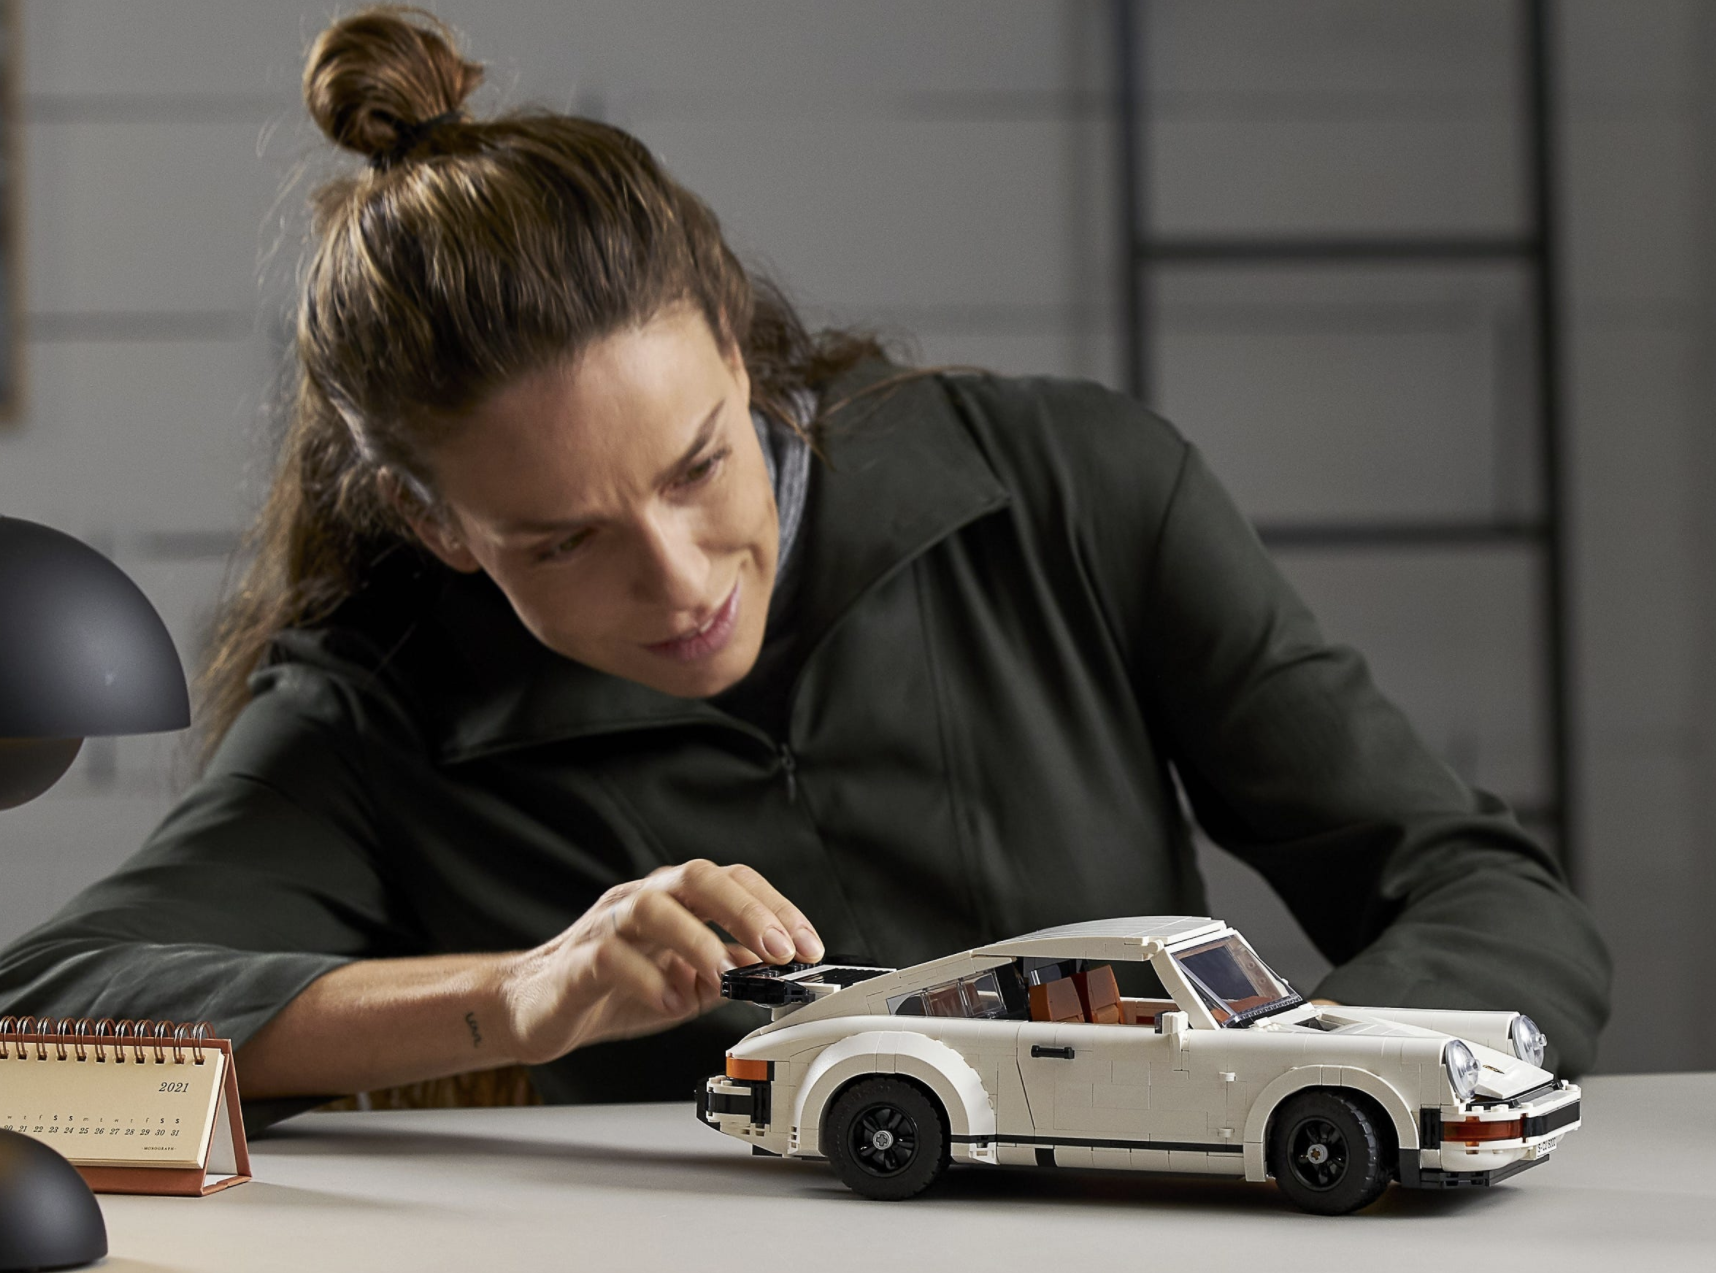 This Lego kit lets you make 2 different types of Porsche 911 models